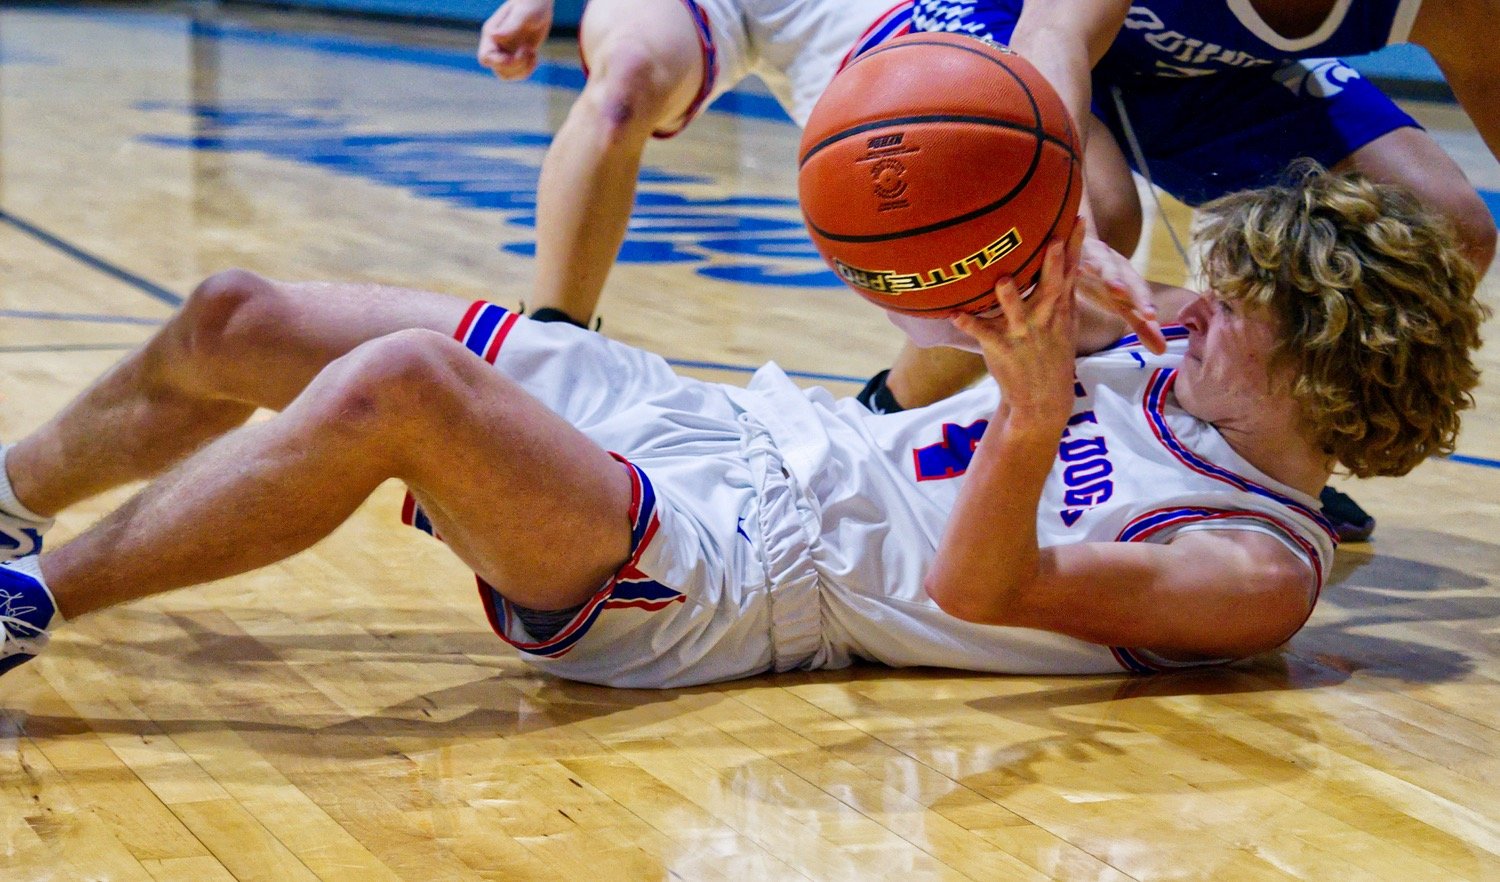 Carter Smith puts in floor time to secure the loose ball. [see more shots, buy basketball photos]